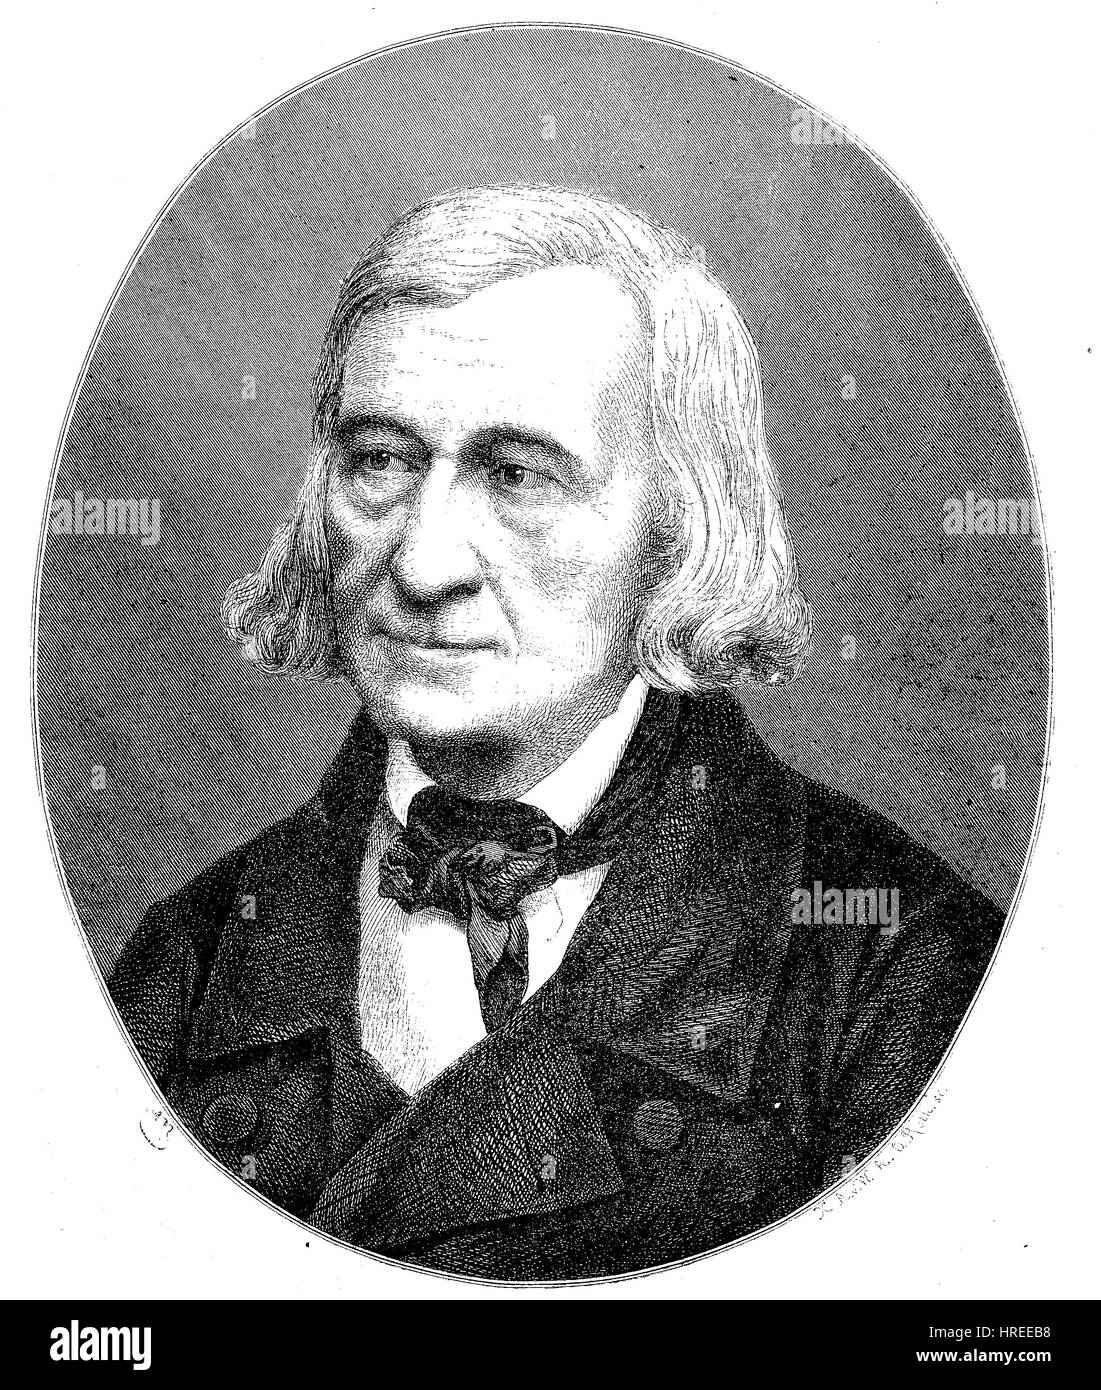 Wilhelm Carl Grimm, 24 February 1786 - 16 December 1859, was a German author, reproduction of an woodcut from the 19th century, 1885 Stock Photo